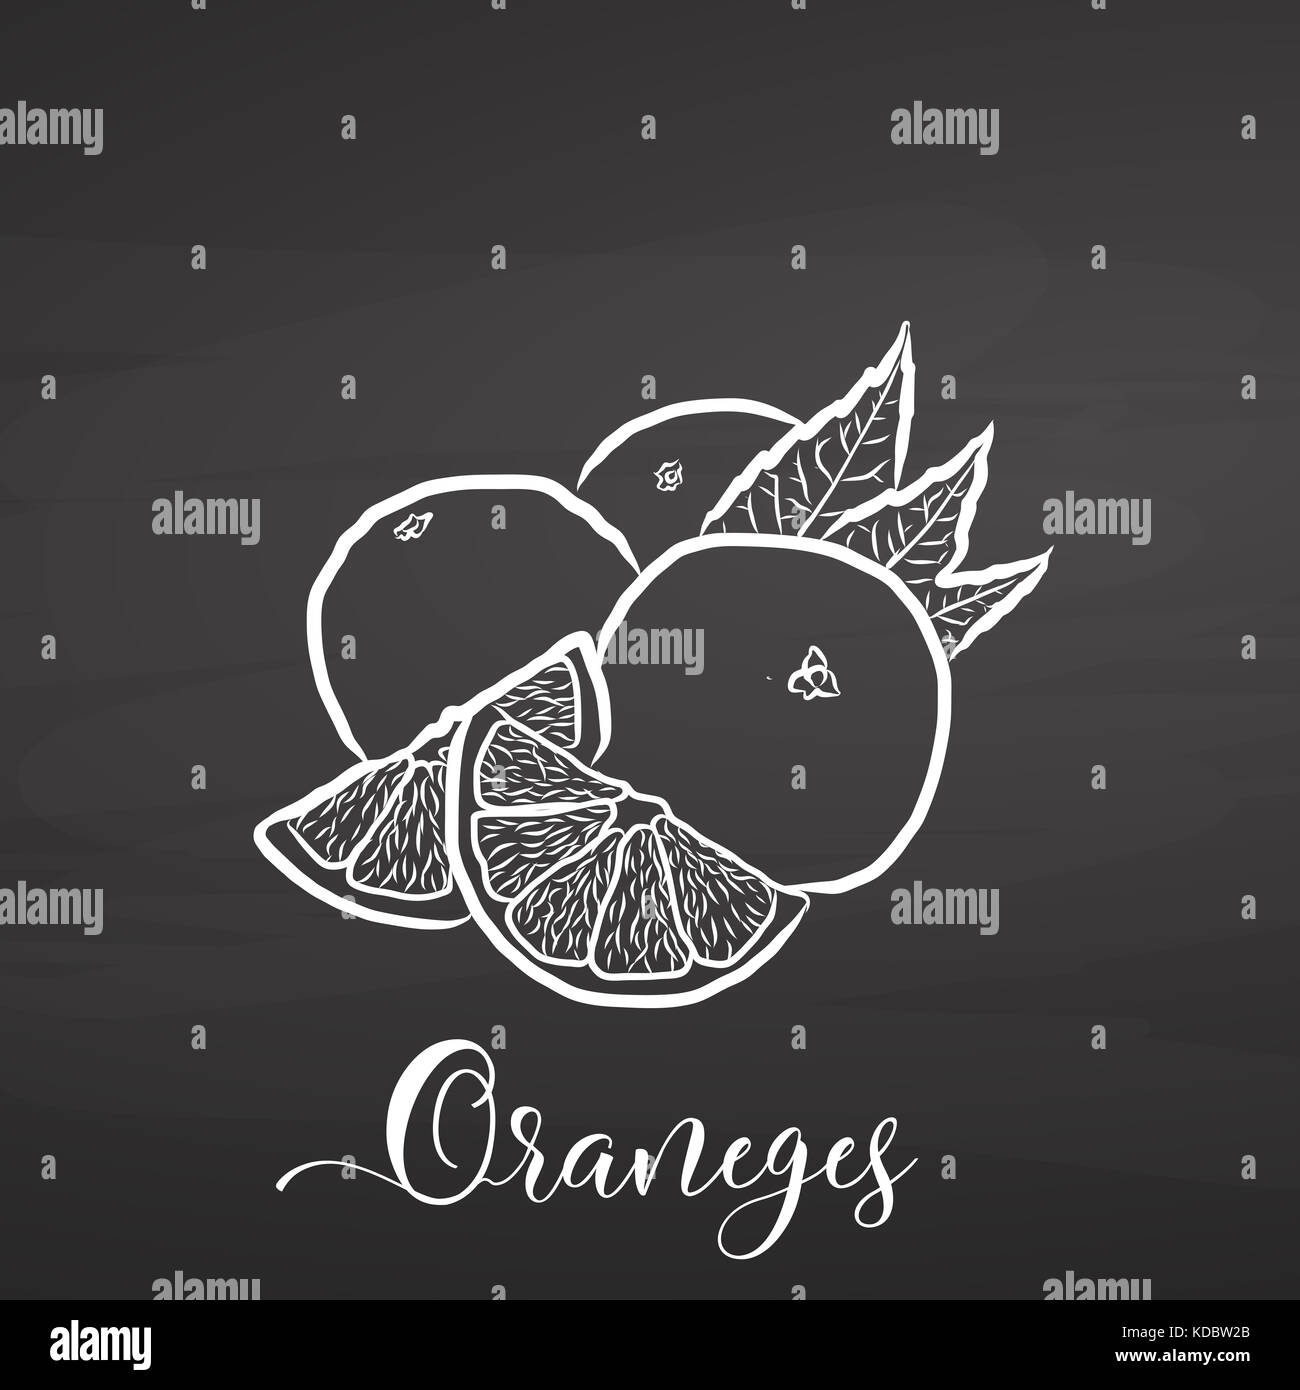 Sliced Oranges. Chalk on chalkboard. Hand drawn healthy food sketch. Black and White Vector Drawing on Blackboard. Stock Photo